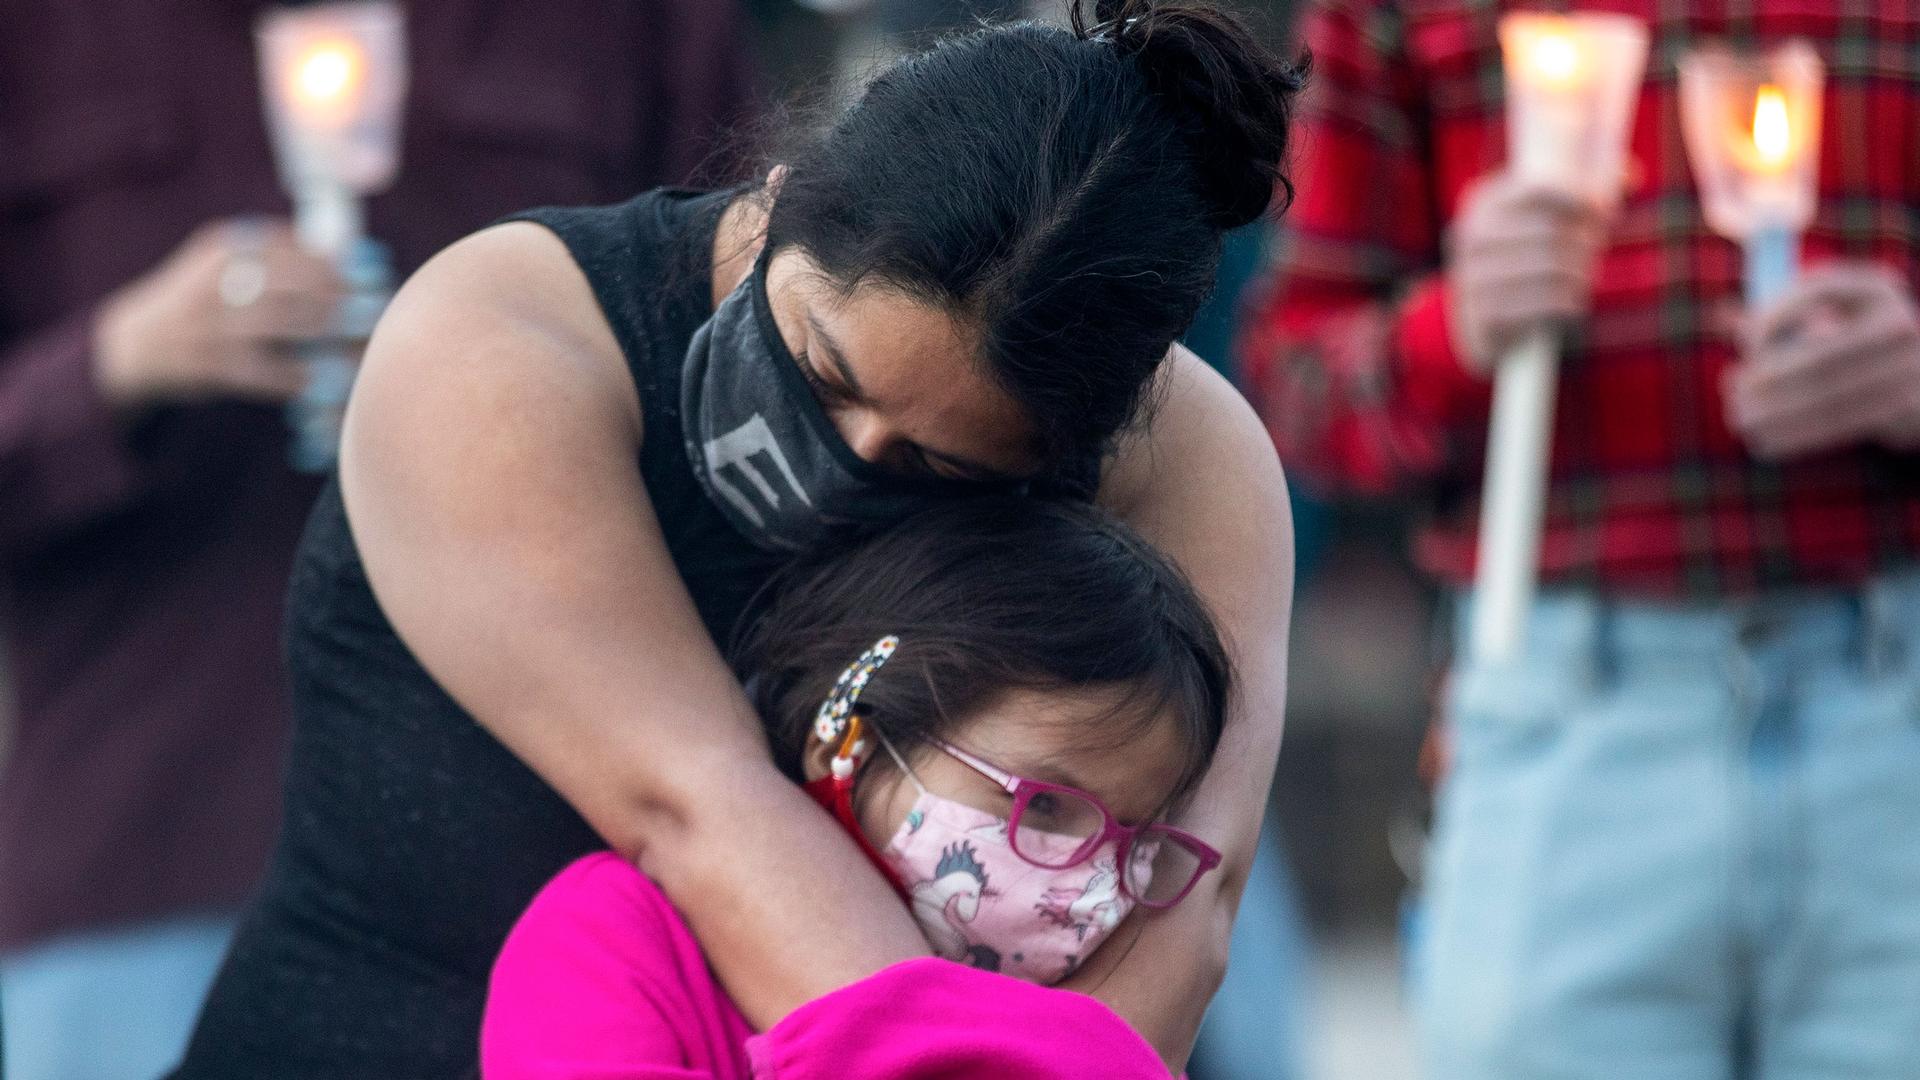 A woman is shown wearing a dark shirt and face mask while hugging a young girl who is wearing a pink shirt.